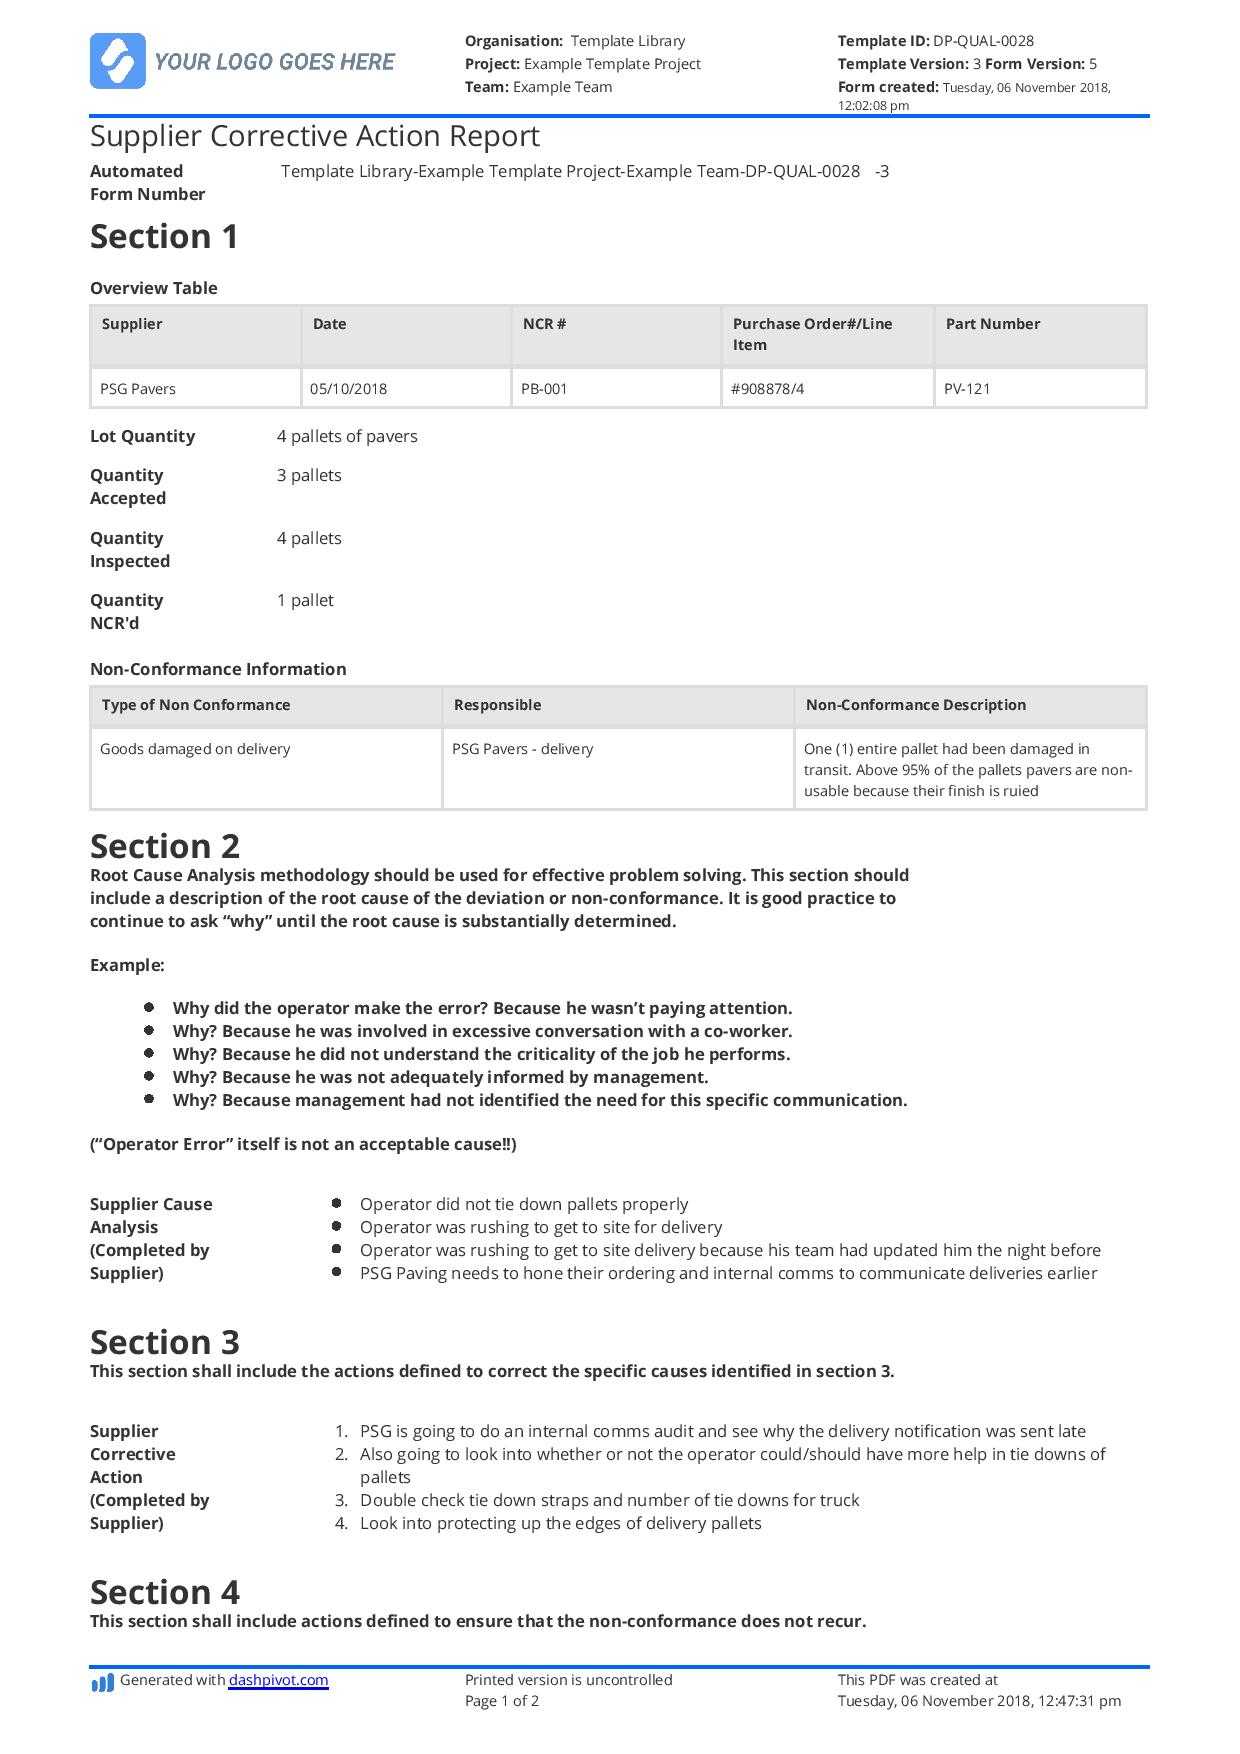 Supplier Corrective Action Report Template: Improve Your In Corrective Action Report Template